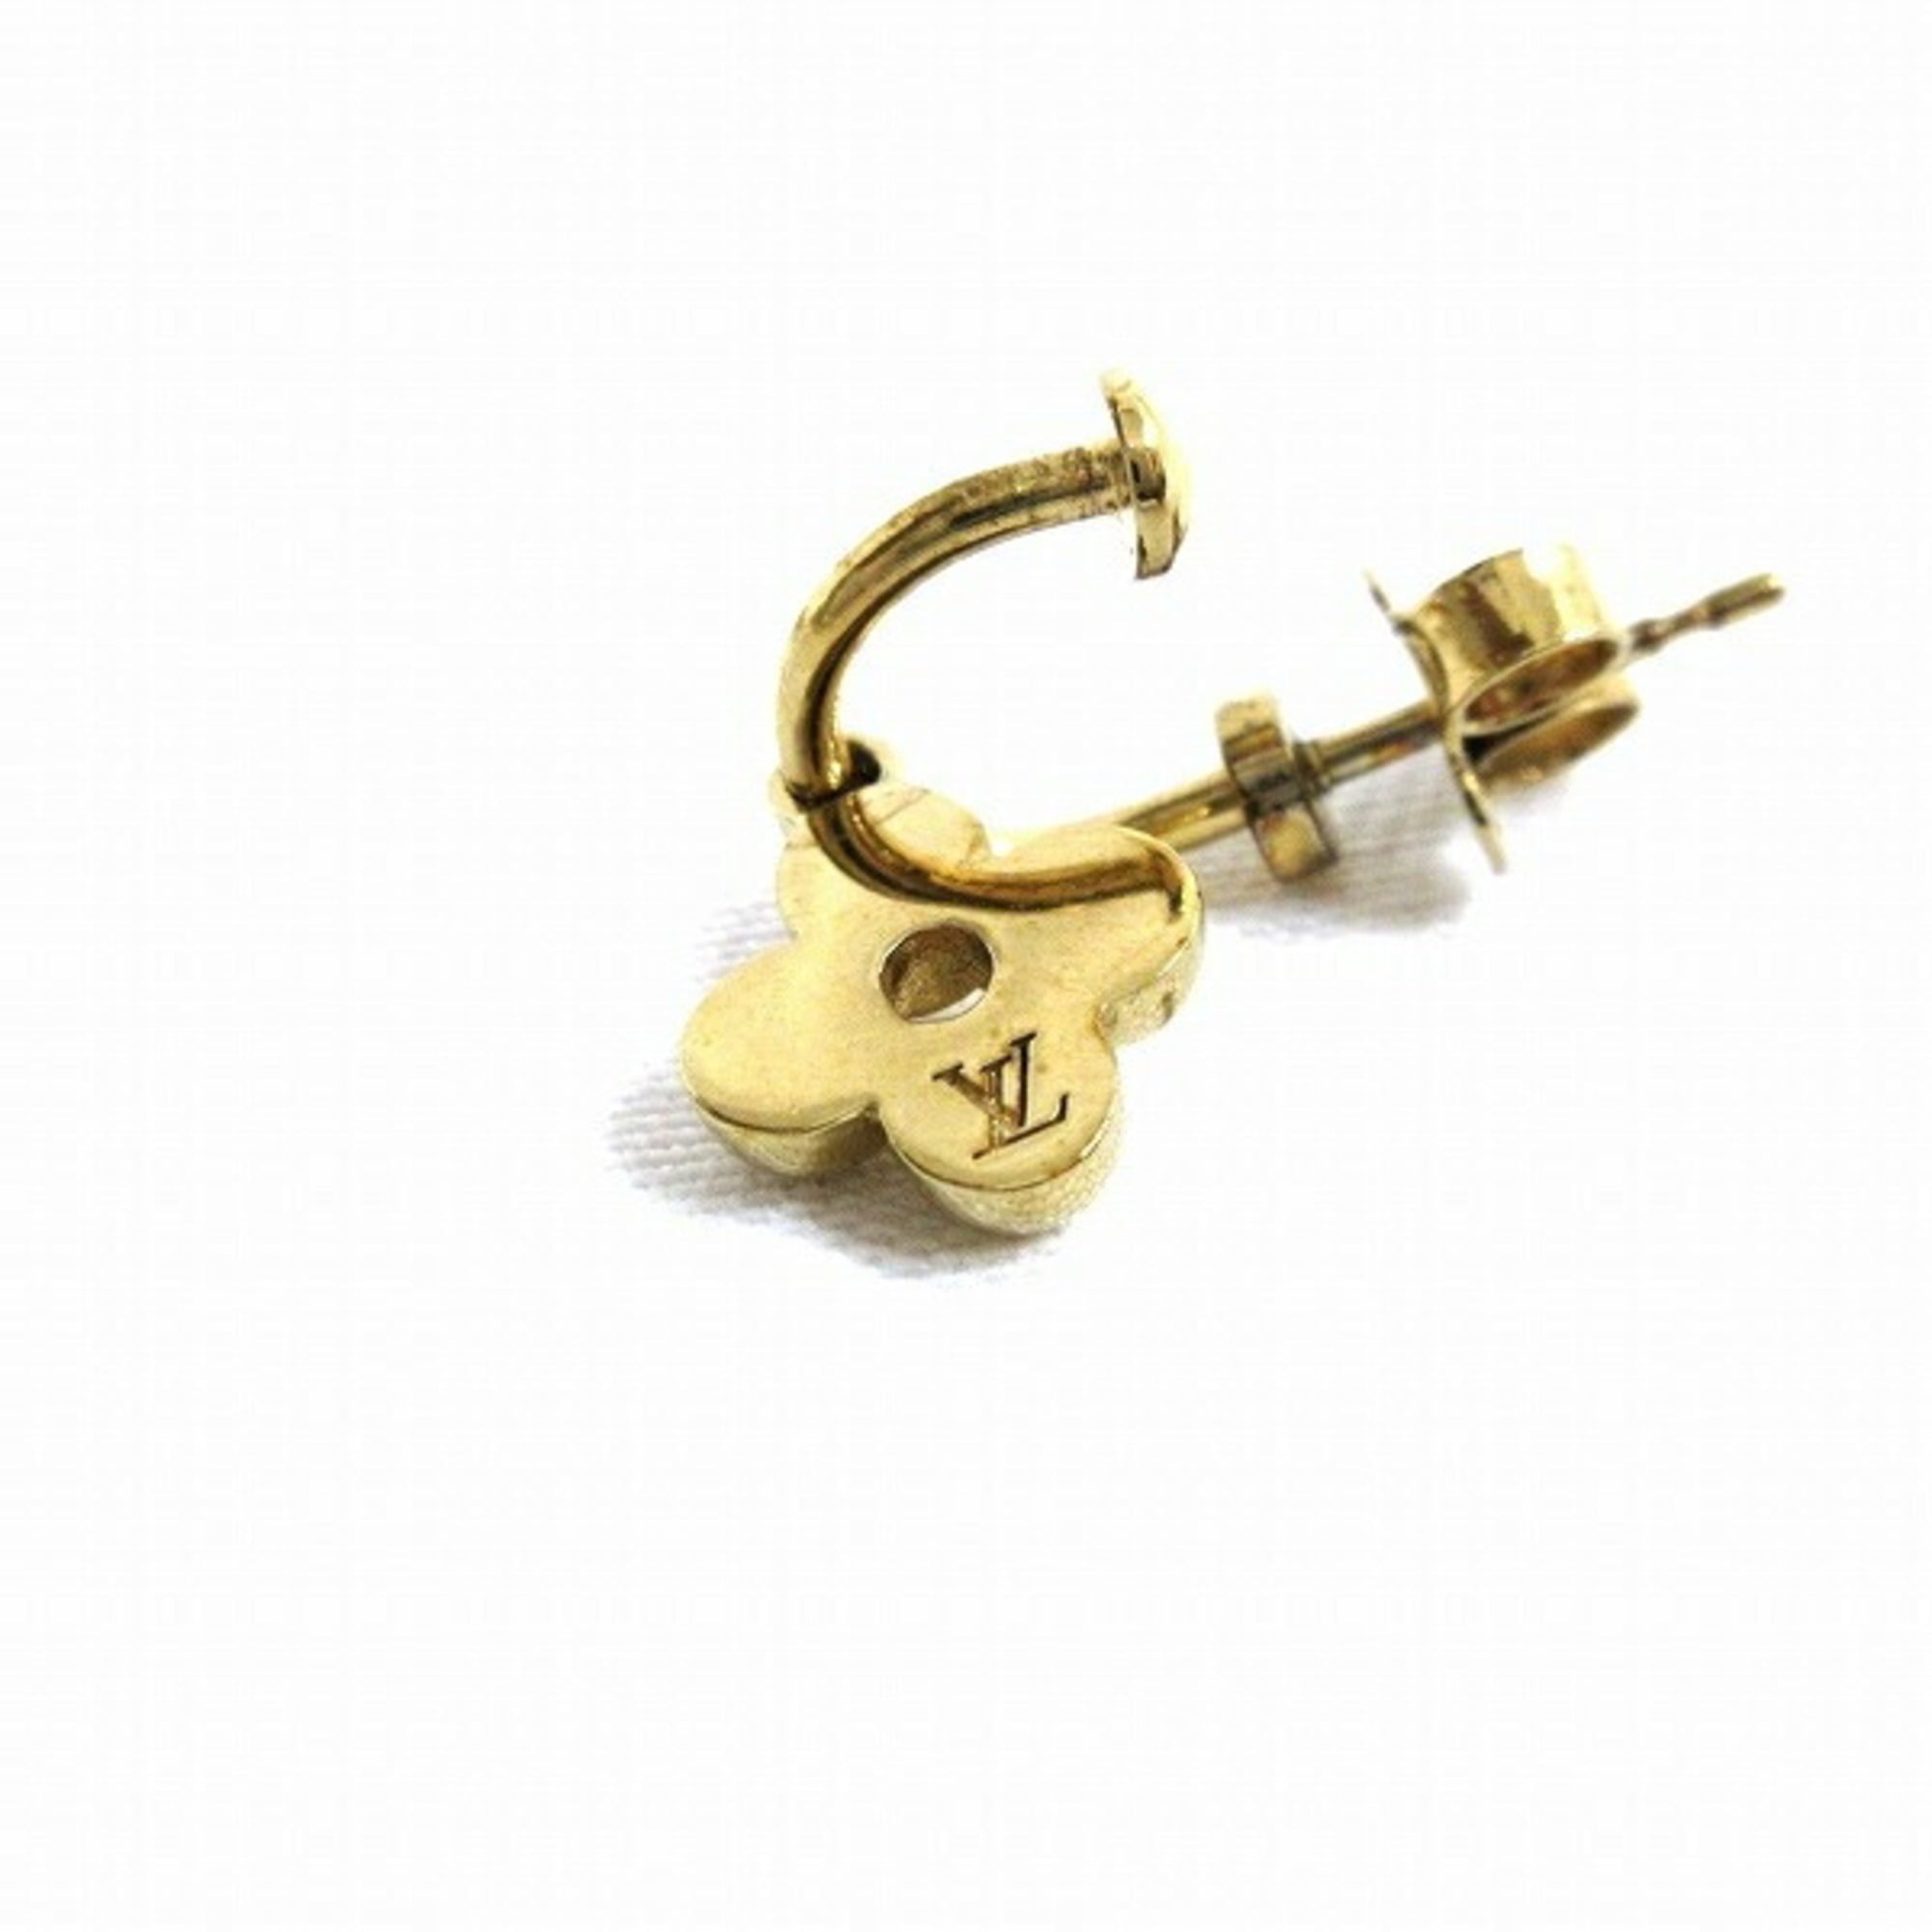 LOUIS VUITTON LOUIS VUITTON Boucle d'oreille Blooming Pierced earrings Gold  Plated Used LV M64859